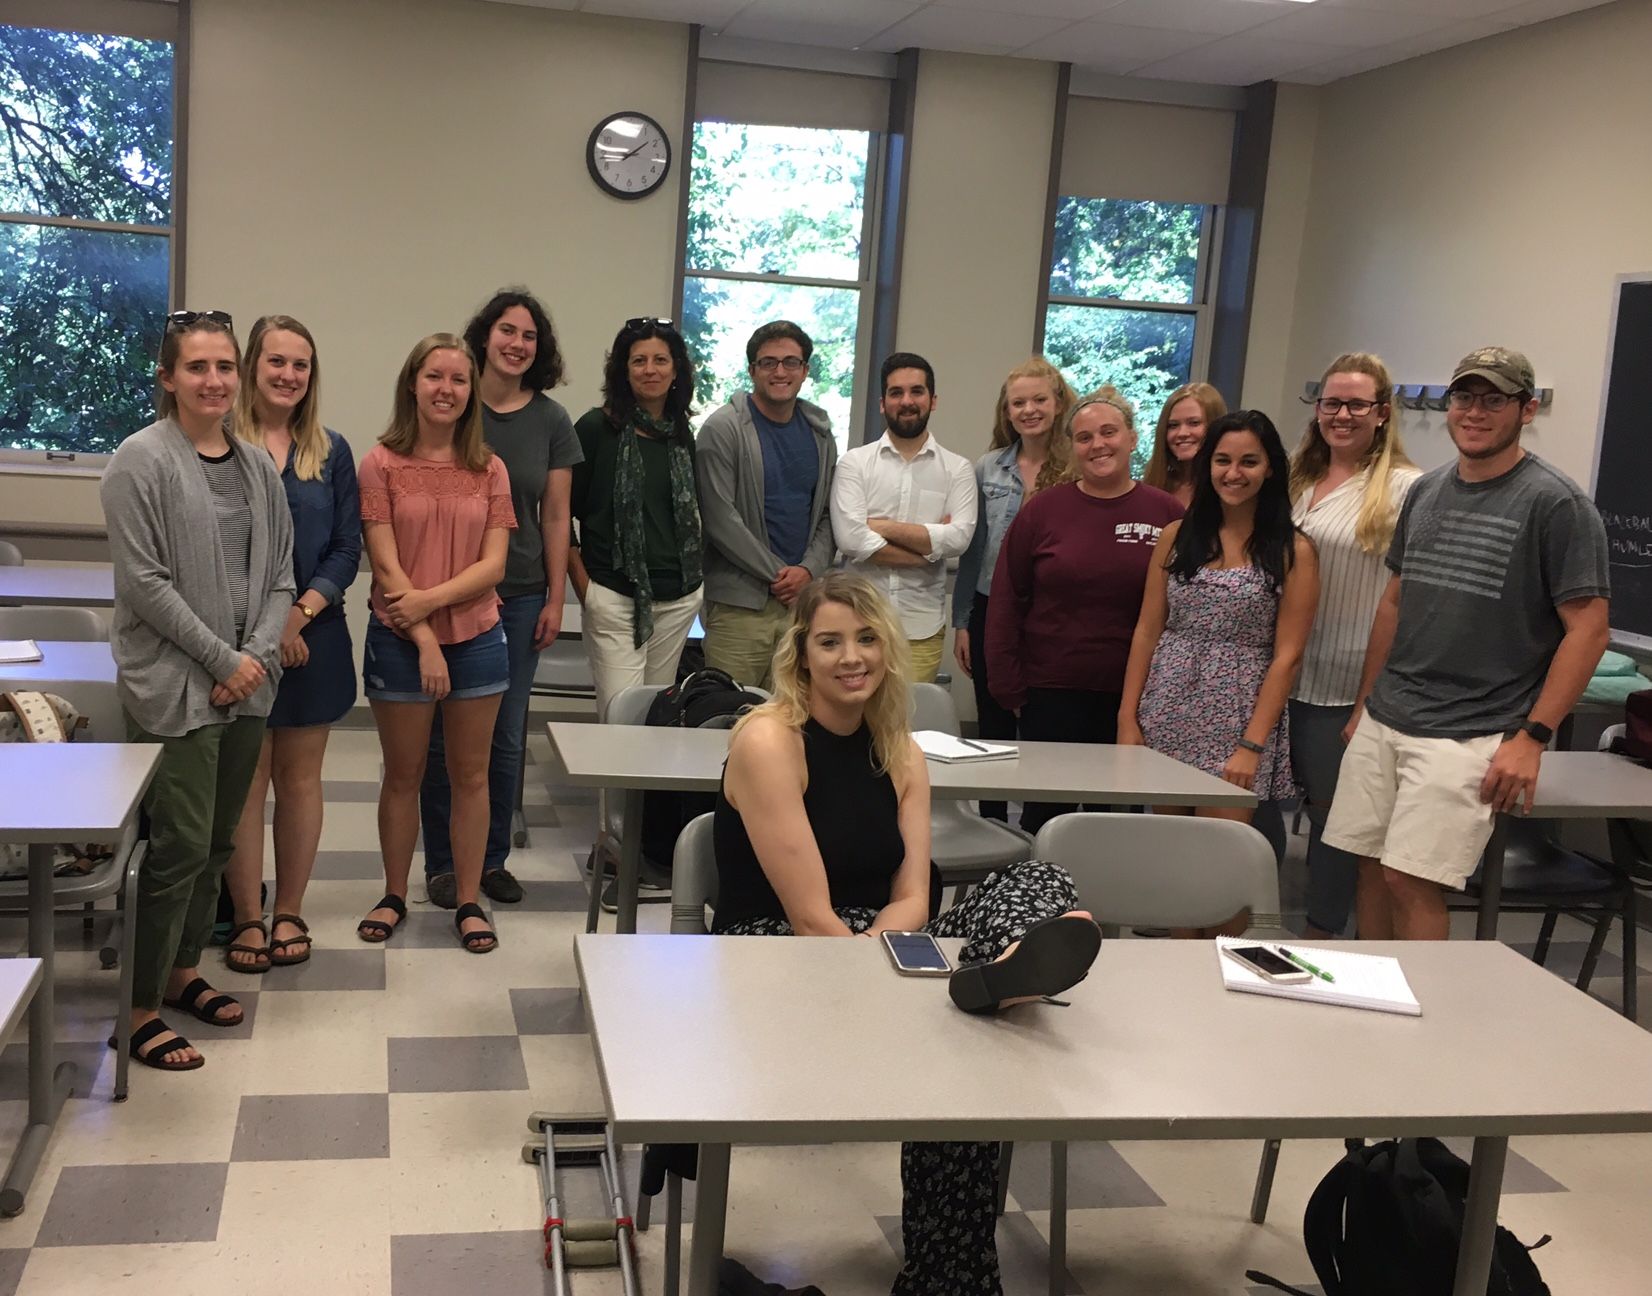 Professor Katherine Reed and students in the "Covering Traumatic Events" class at the University of Missouri School of Journalism in Columbia. Image by Kem Knapp Sawyer. United States, 2017.